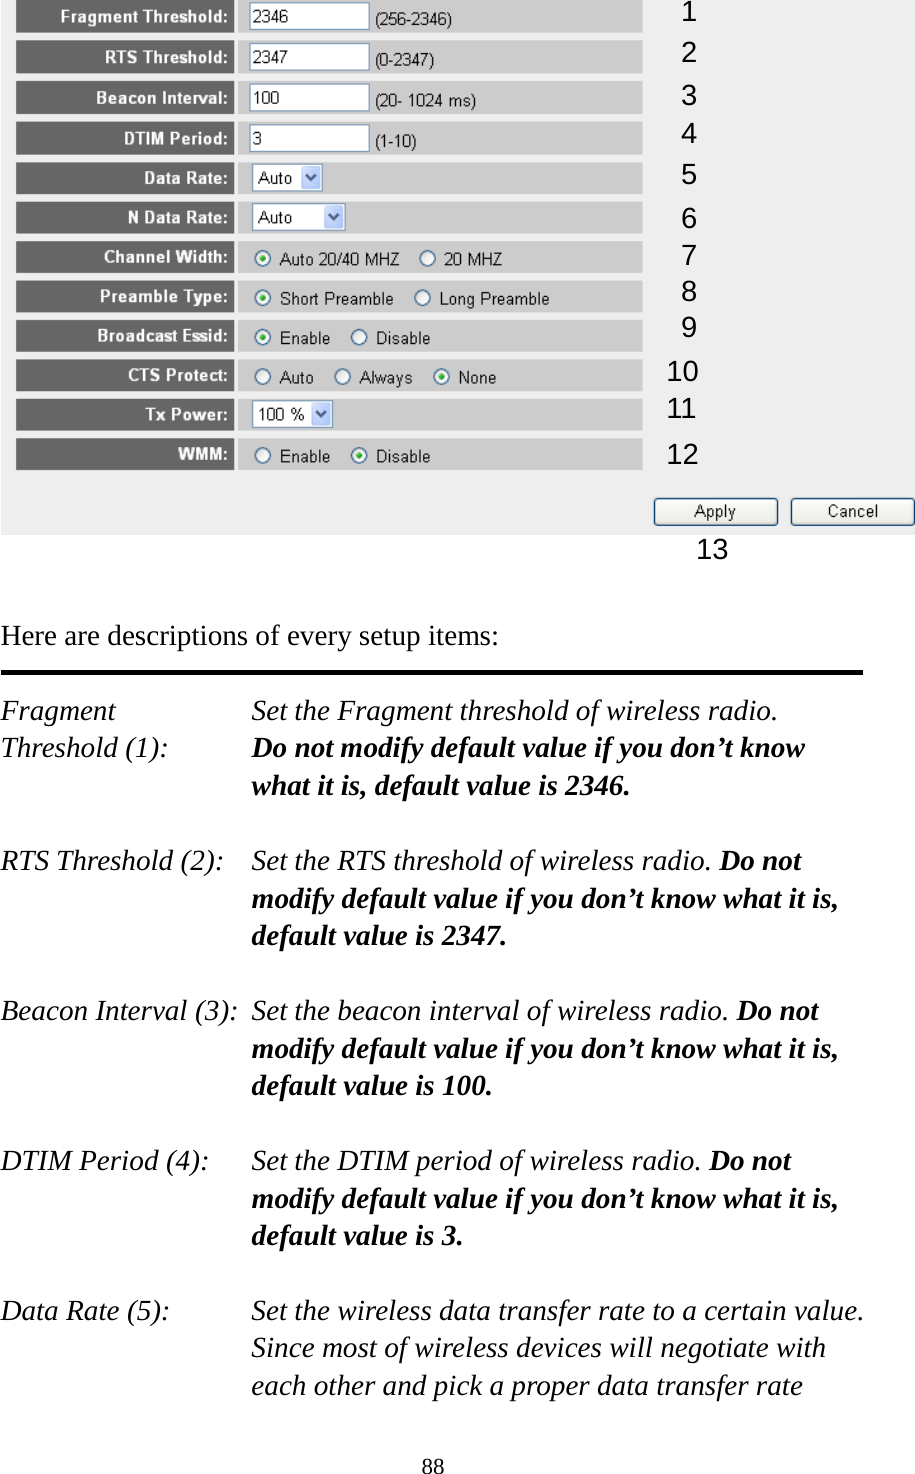 88    Here are descriptions of every setup items:  Fragment Set the Fragment threshold of wireless radio.    Threshold (1):  Do not modify default value if you don’t know what it is, default value is 2346.  RTS Threshold (2):    Set the RTS threshold of wireless radio. Do not modify default value if you don’t know what it is, default value is 2347.  Beacon Interval (3):  Set the beacon interval of wireless radio. Do not modify default value if you don’t know what it is, default value is 100.  DTIM Period (4):    Set the DTIM period of wireless radio. Do not modify default value if you don’t know what it is, default value is 3.  Data Rate (5):    Set the wireless data transfer rate to a certain value. Since most of wireless devices will negotiate with each other and pick a proper data transfer rate 1 2 3 4 5 7 8 6 9 10 11 12 13 